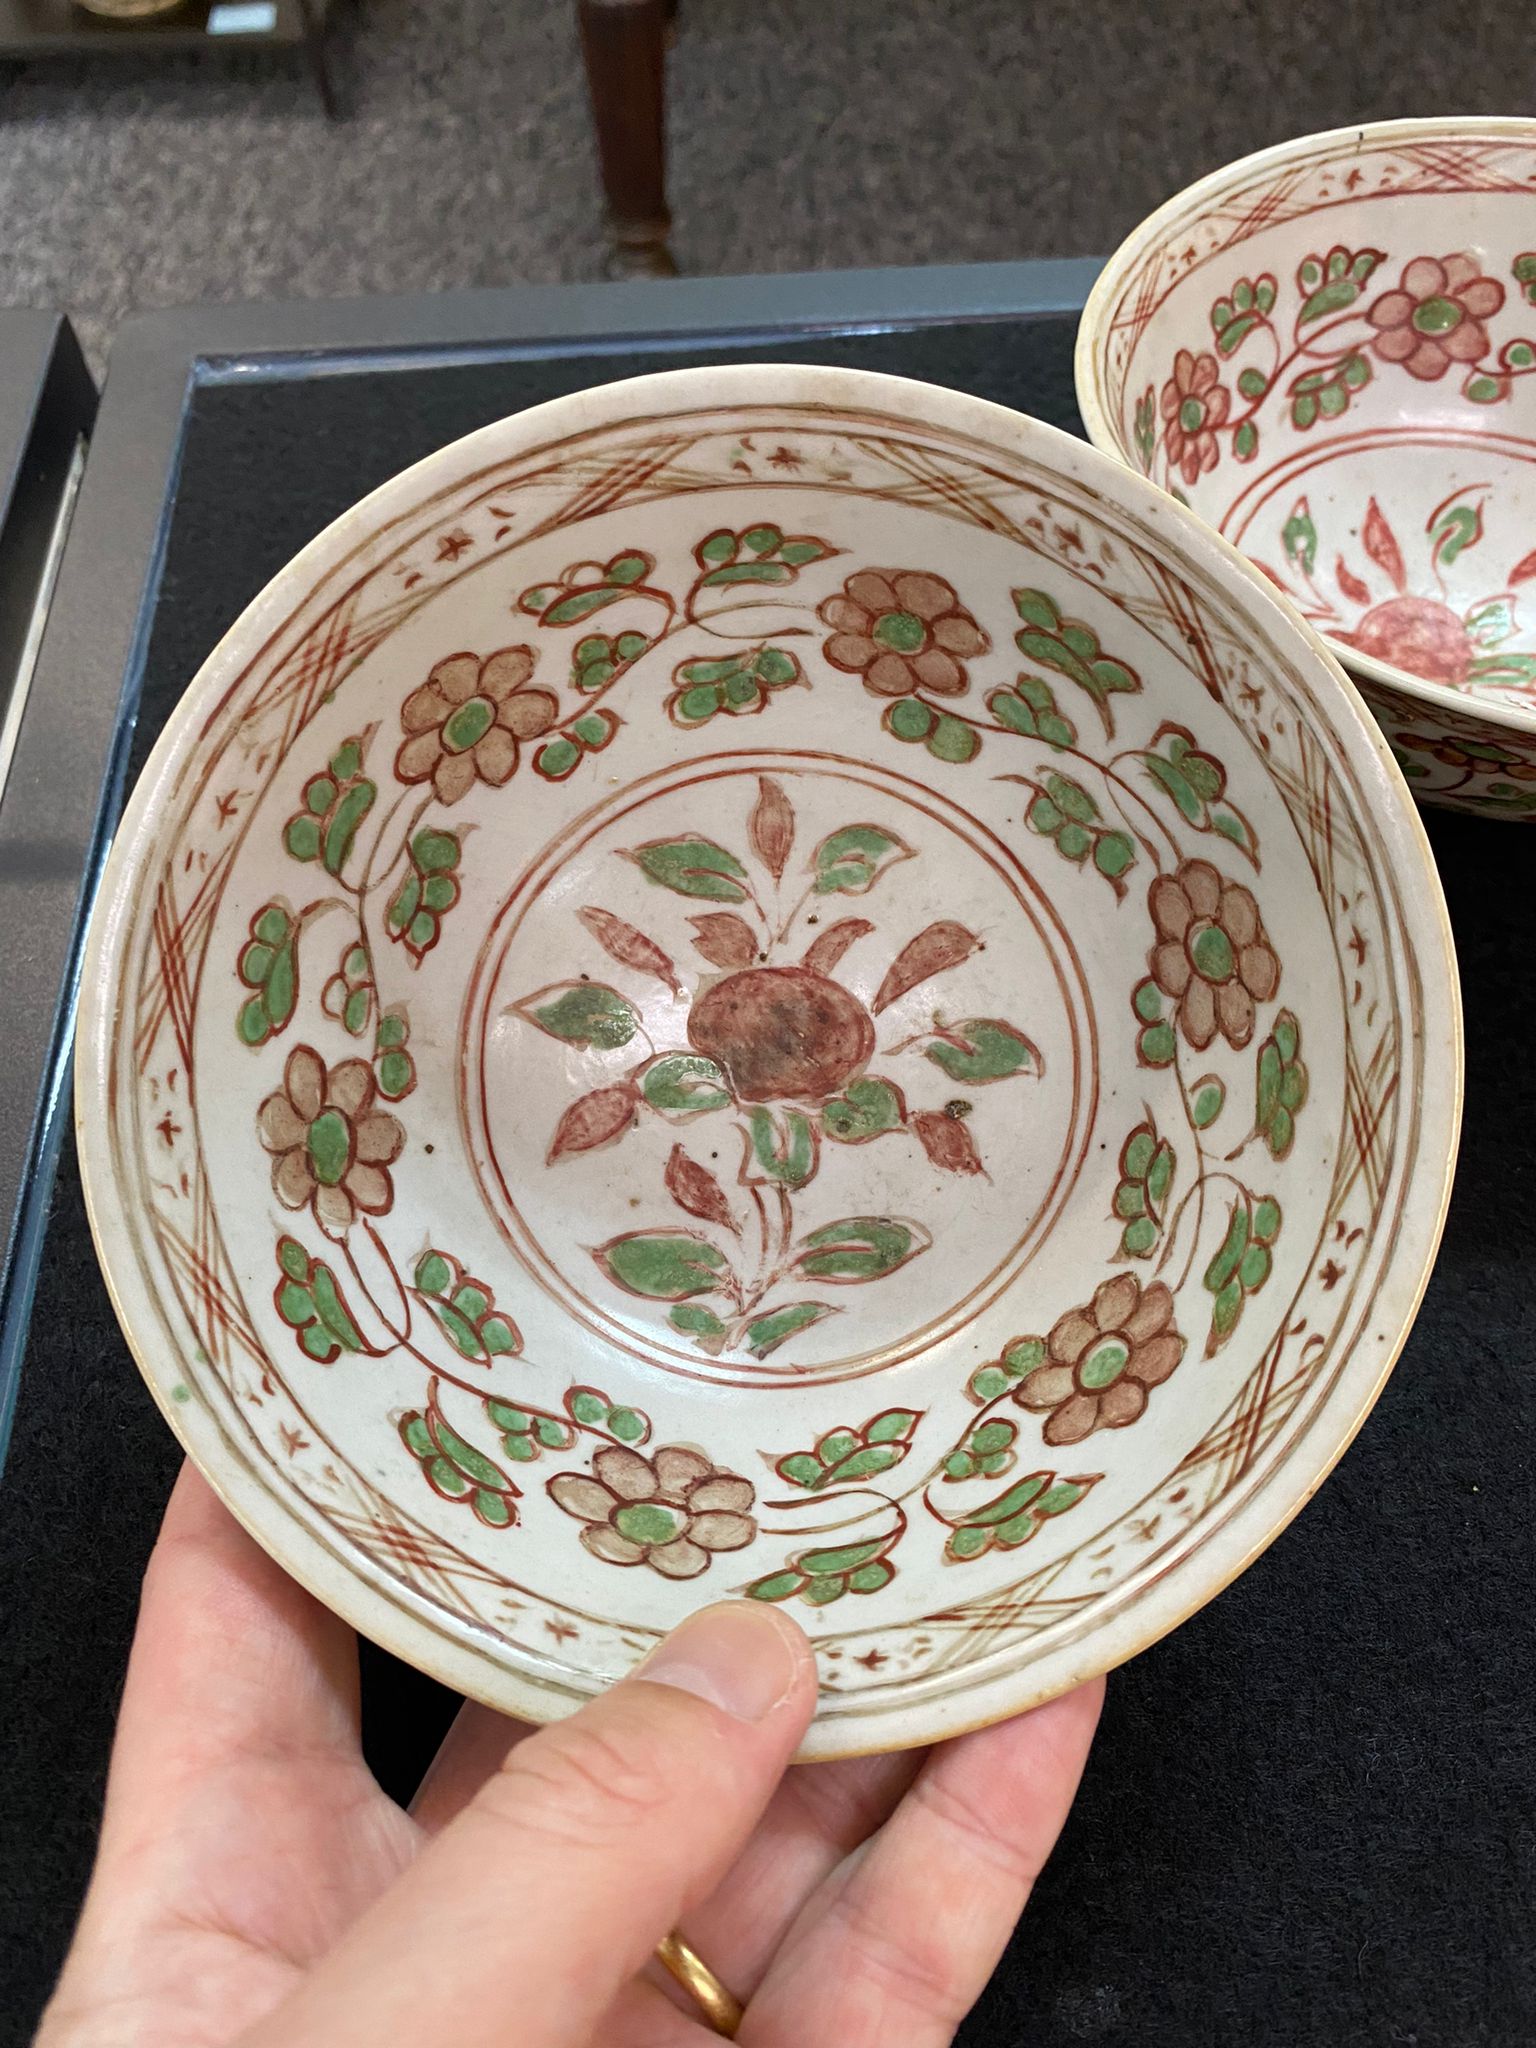 A PAIR OF SWATOW PORCELAIN BOWLS AND A SIMILAR SAUCER - Image 5 of 15